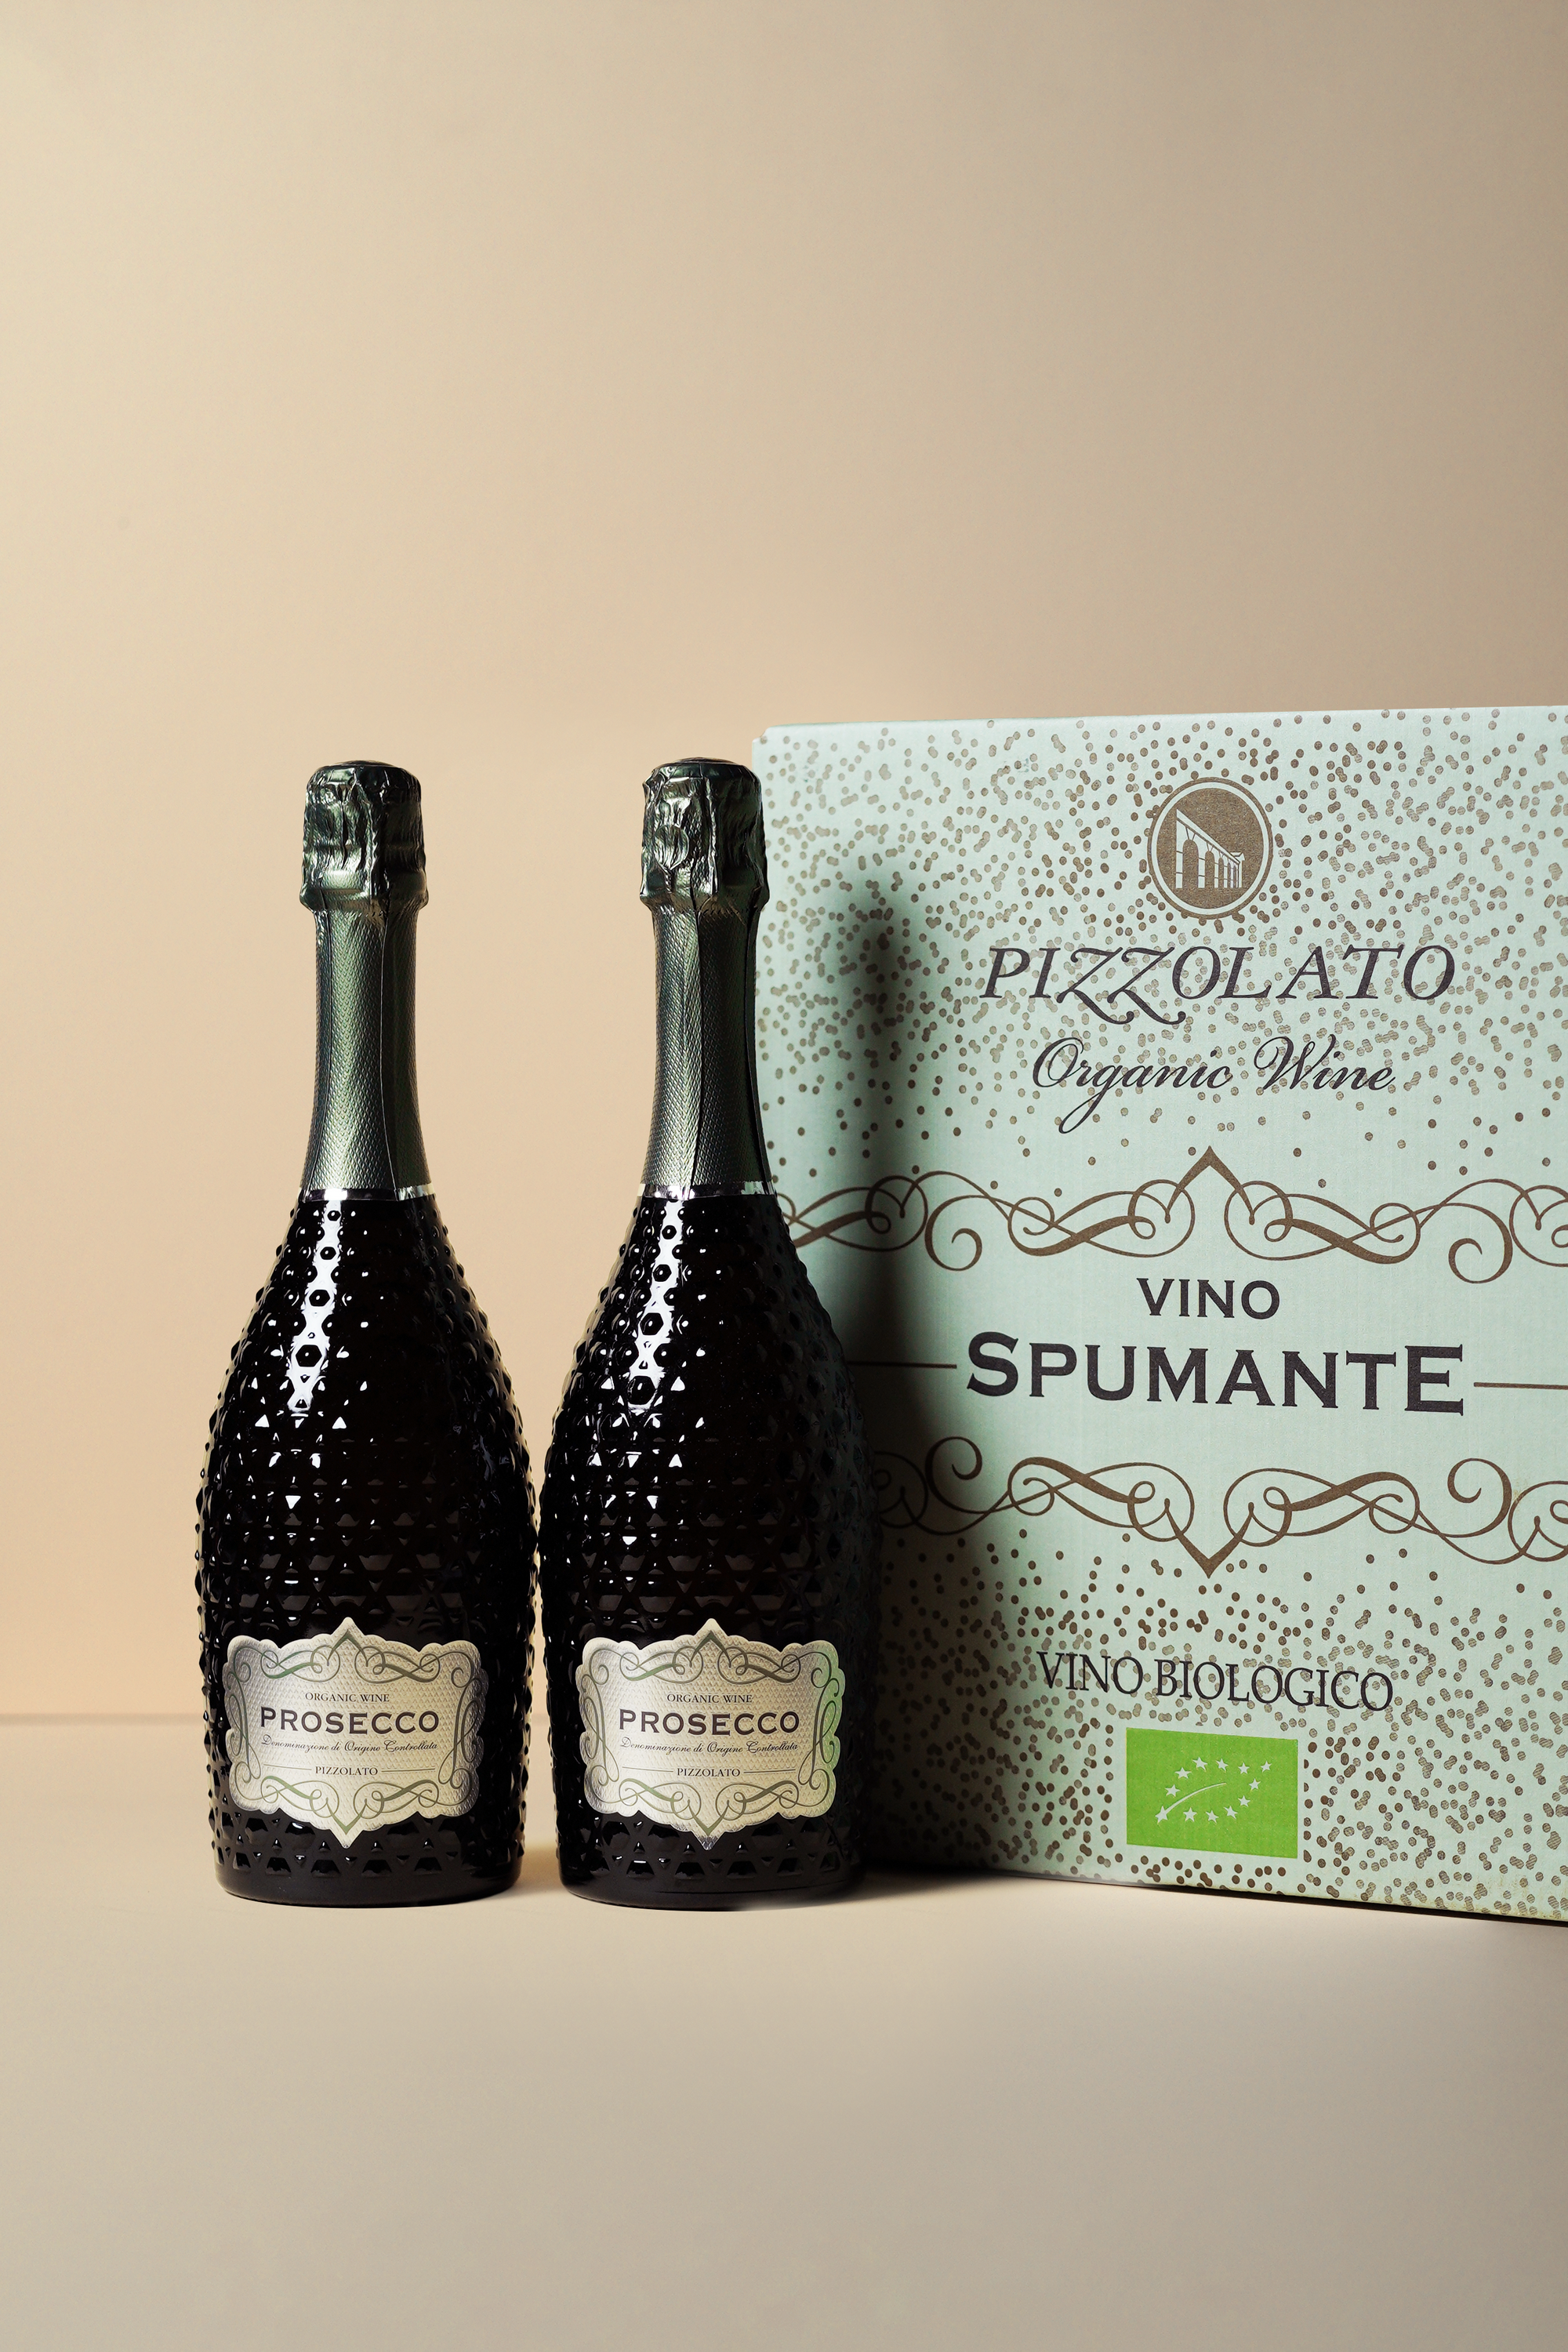 Pizzolato, Spumante Prosecco Brut M-Use (OCC of 6 bottles)